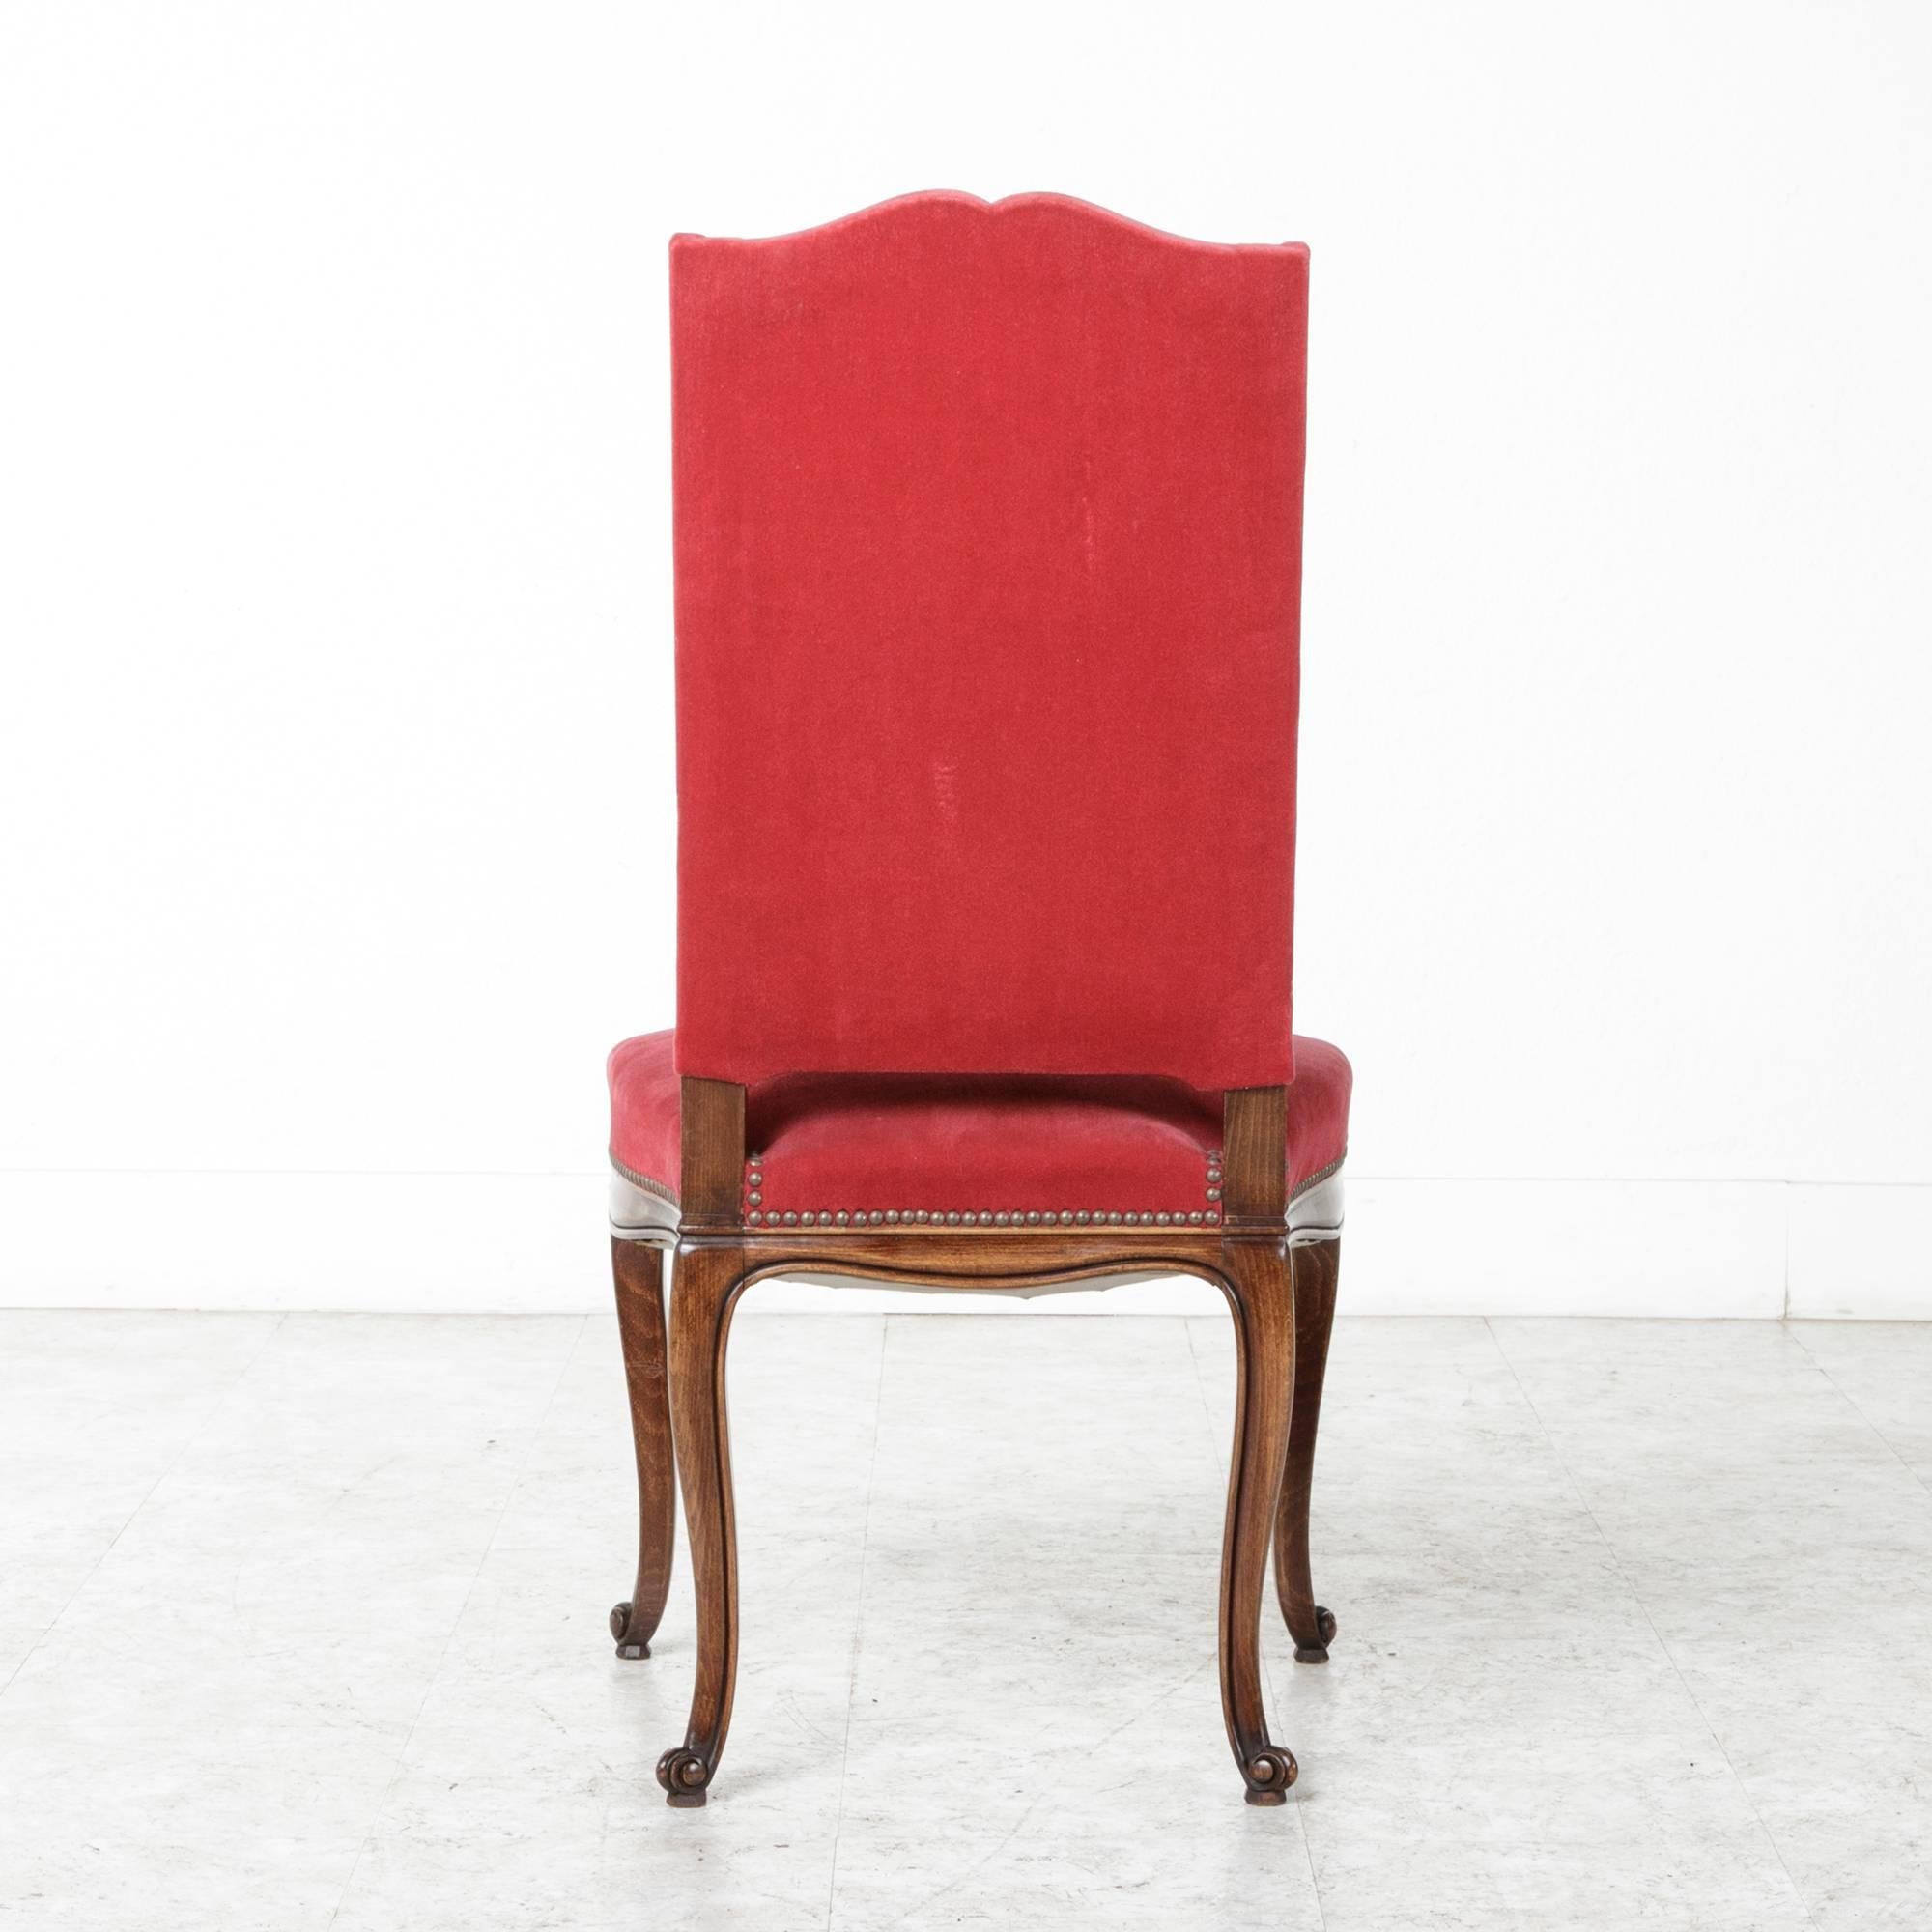 This charming set of six beechwood Louis XV style chairs were created in France, circa 1950. With comfortable wide seats, carved aprons and sinuous cabriole legs, this set of chairs has a lovely inviting feel. The vibrant red mohair upholstery is in